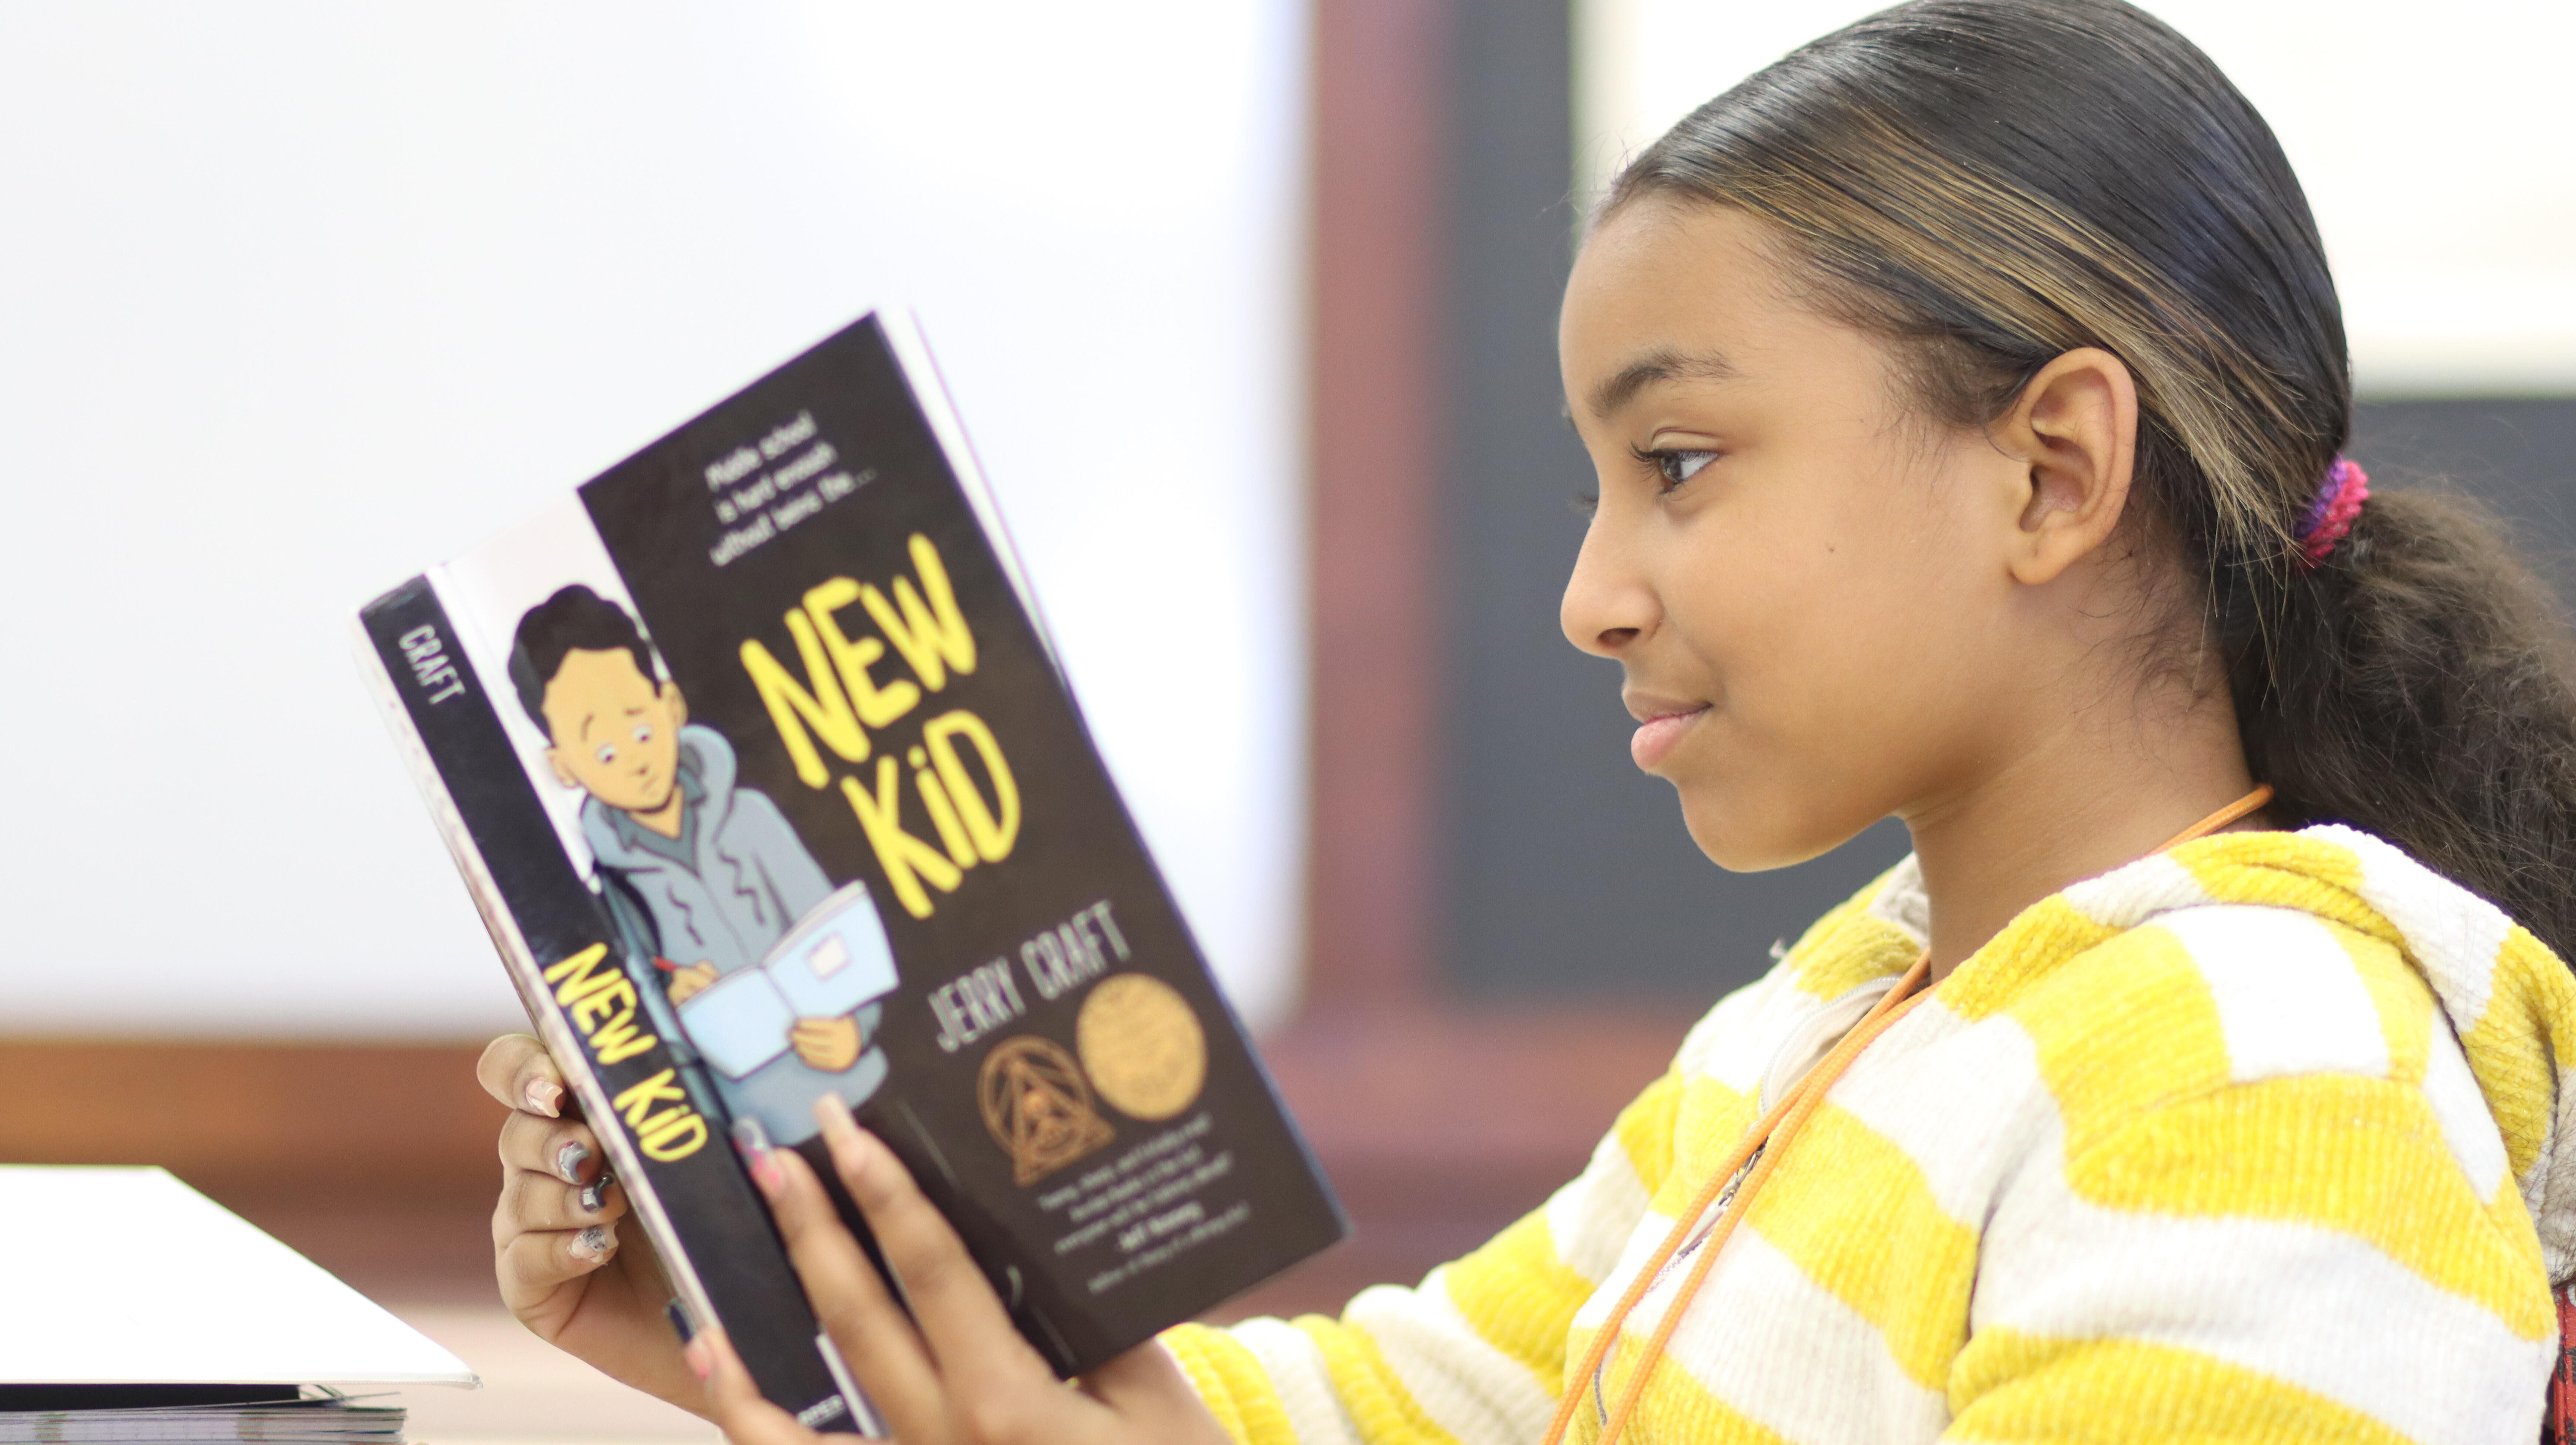 Student reading Jerry Craft's "New Kid"